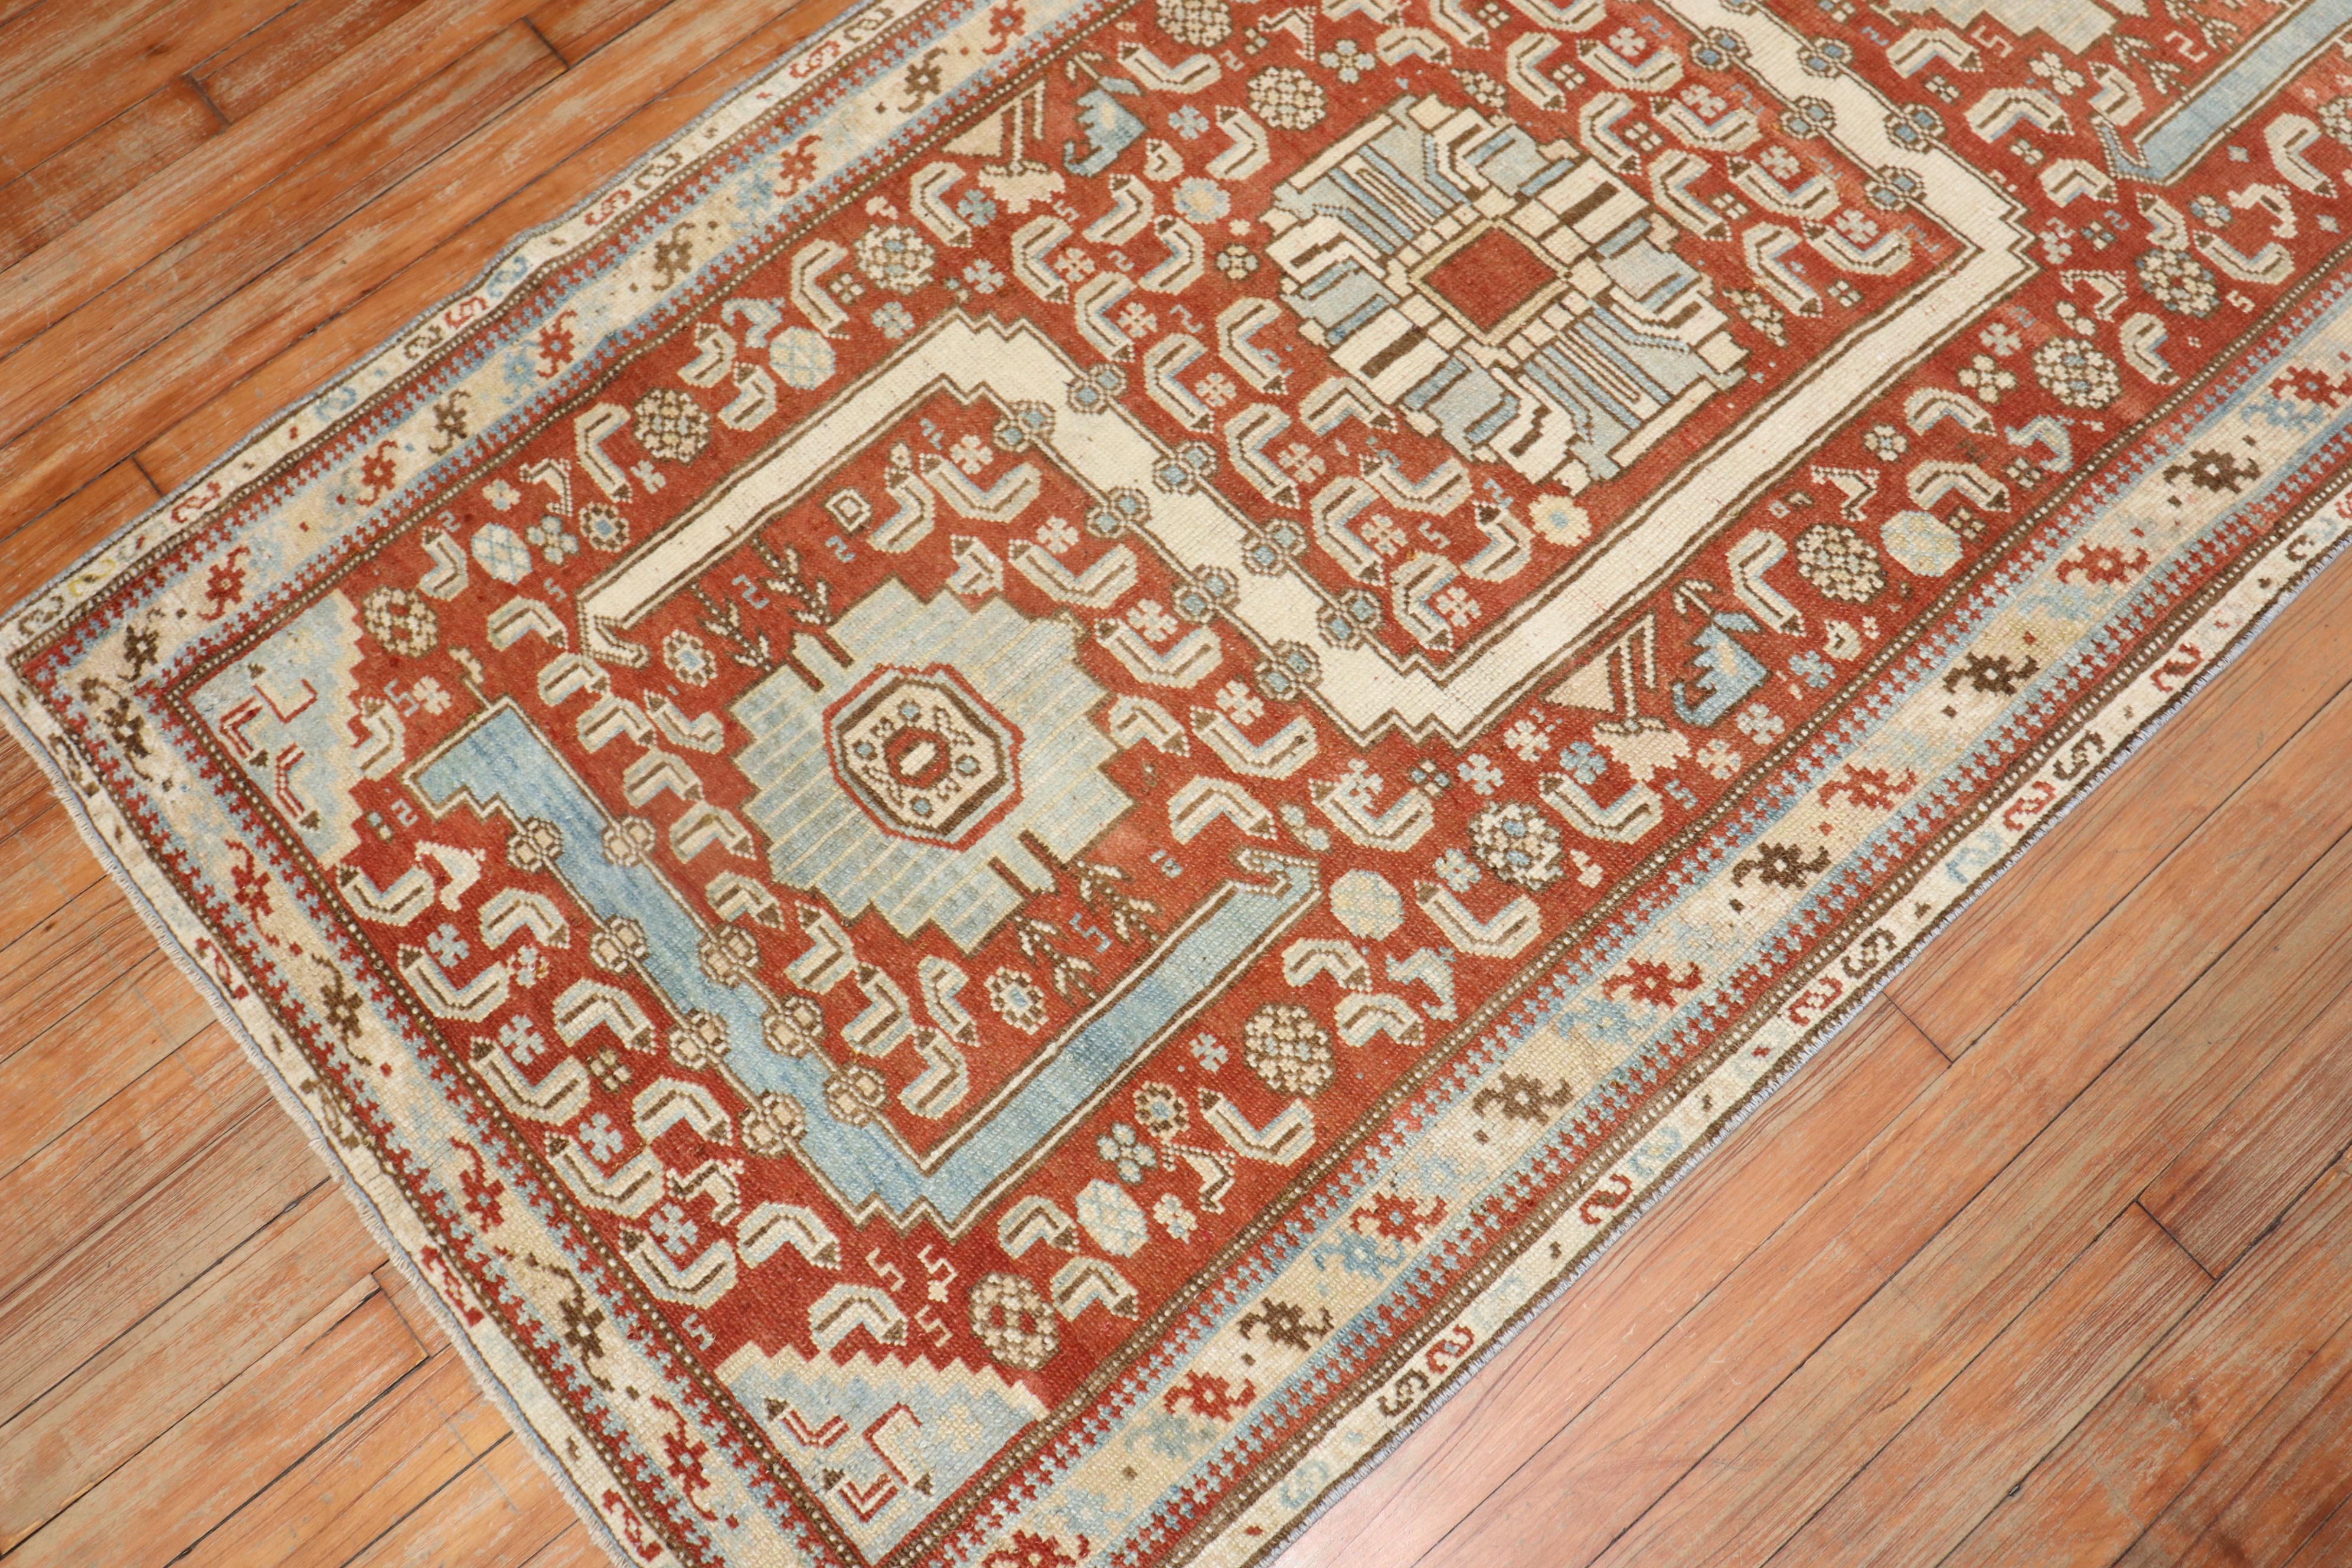 A high decorative early 20th-century Malayer Scatter Size runner

Measures: 3' x 6'1''.